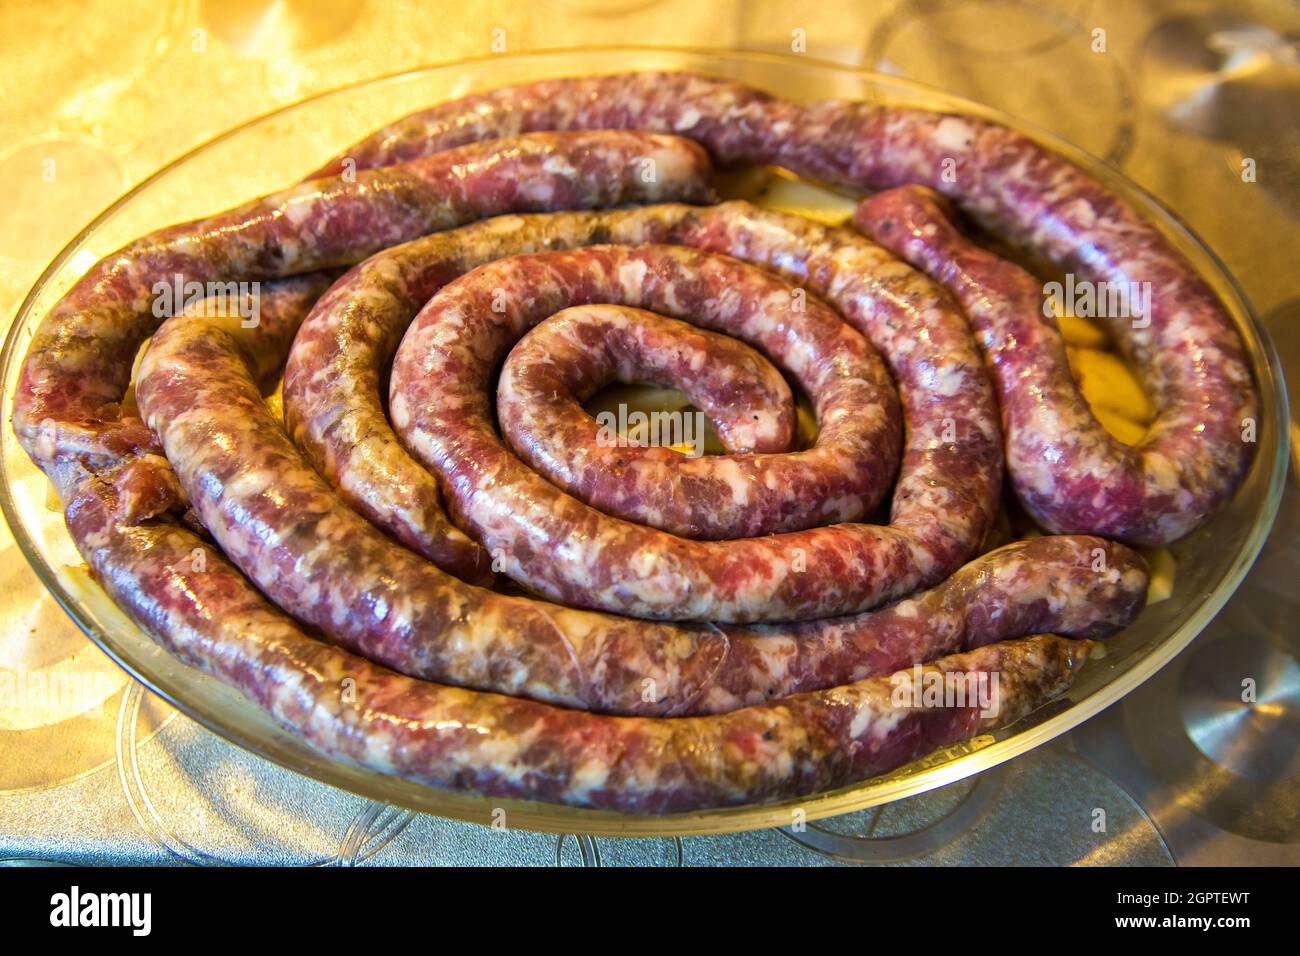 Homemade Sausages On Potatoes Prepared For Cooking. Traditional European Cuisine. Stock Photo